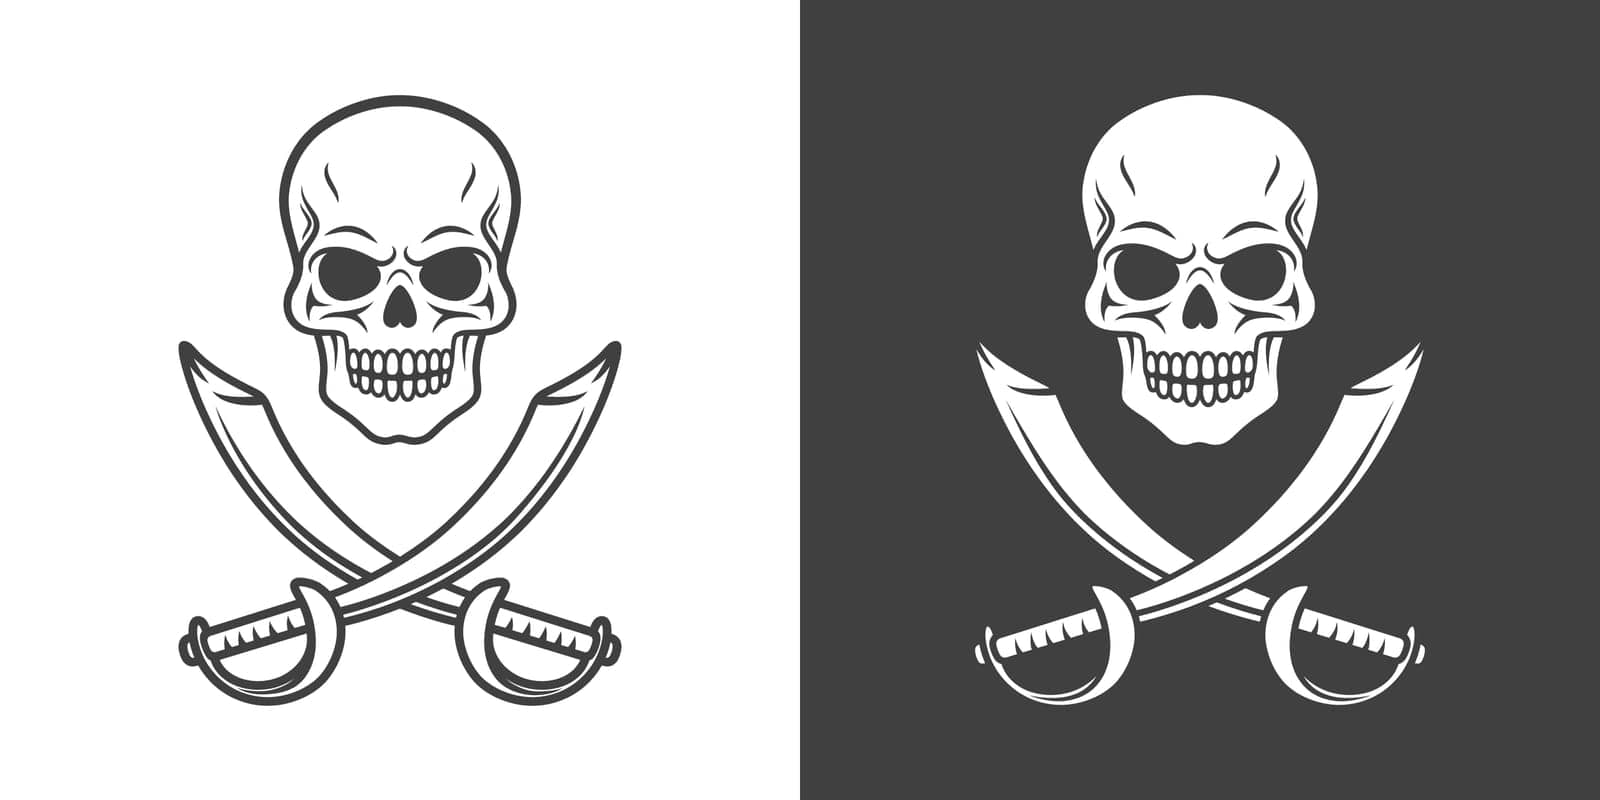 Vector Black and White Skull and Crosshairs Sabers Icon Set Closeup Isolated. Skulls Collection with Outline, Cut Out Style in Front View. Hand Drawn Skull Head Design Template.